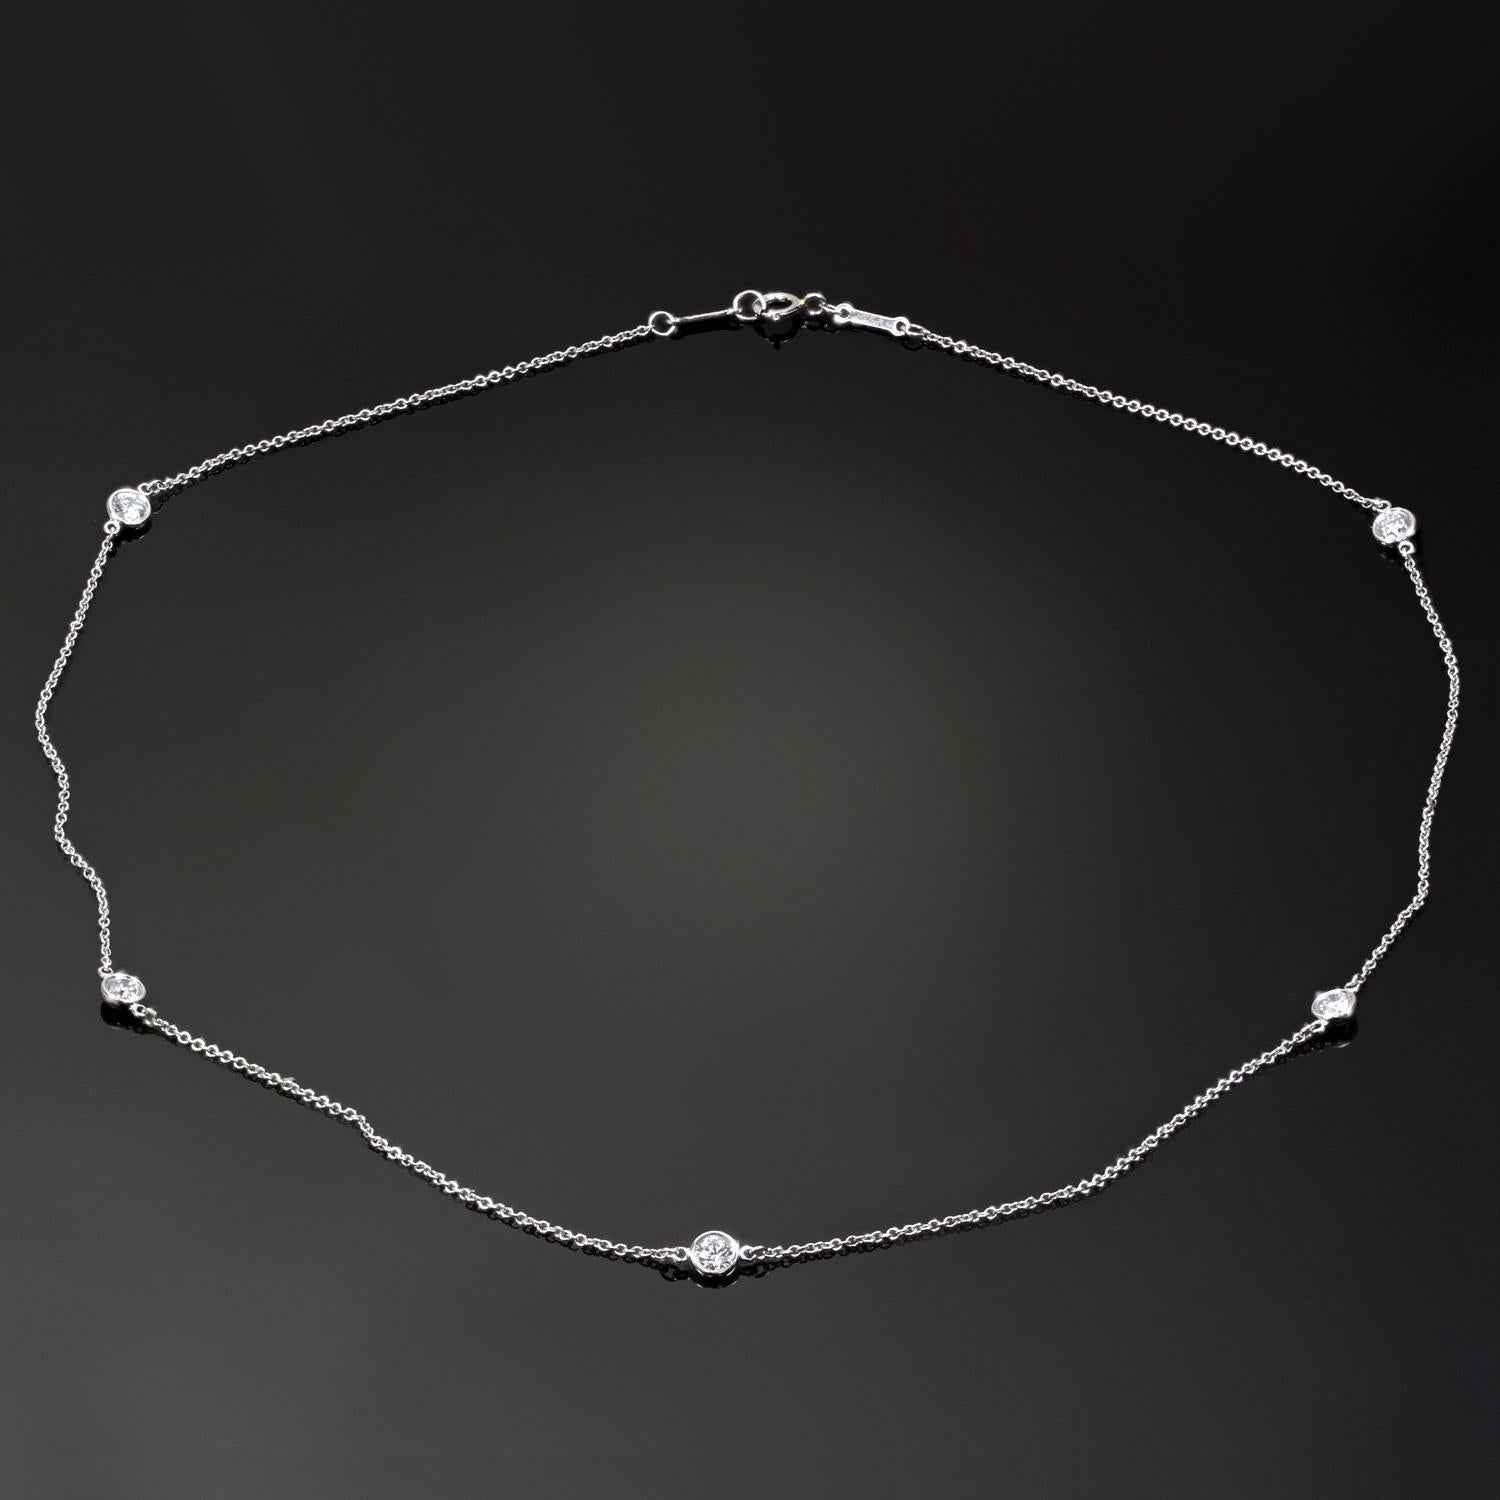 This exquisite Tiffany & Co. Diamond by the Yard necklace is crafted in platinum and features 5 diamonds in 4.5mm round bezel settings.  The round brilliant G VVS2-VS1 diamonds weigh an estimated 0.90 carats. Made in United States circa 2010s.